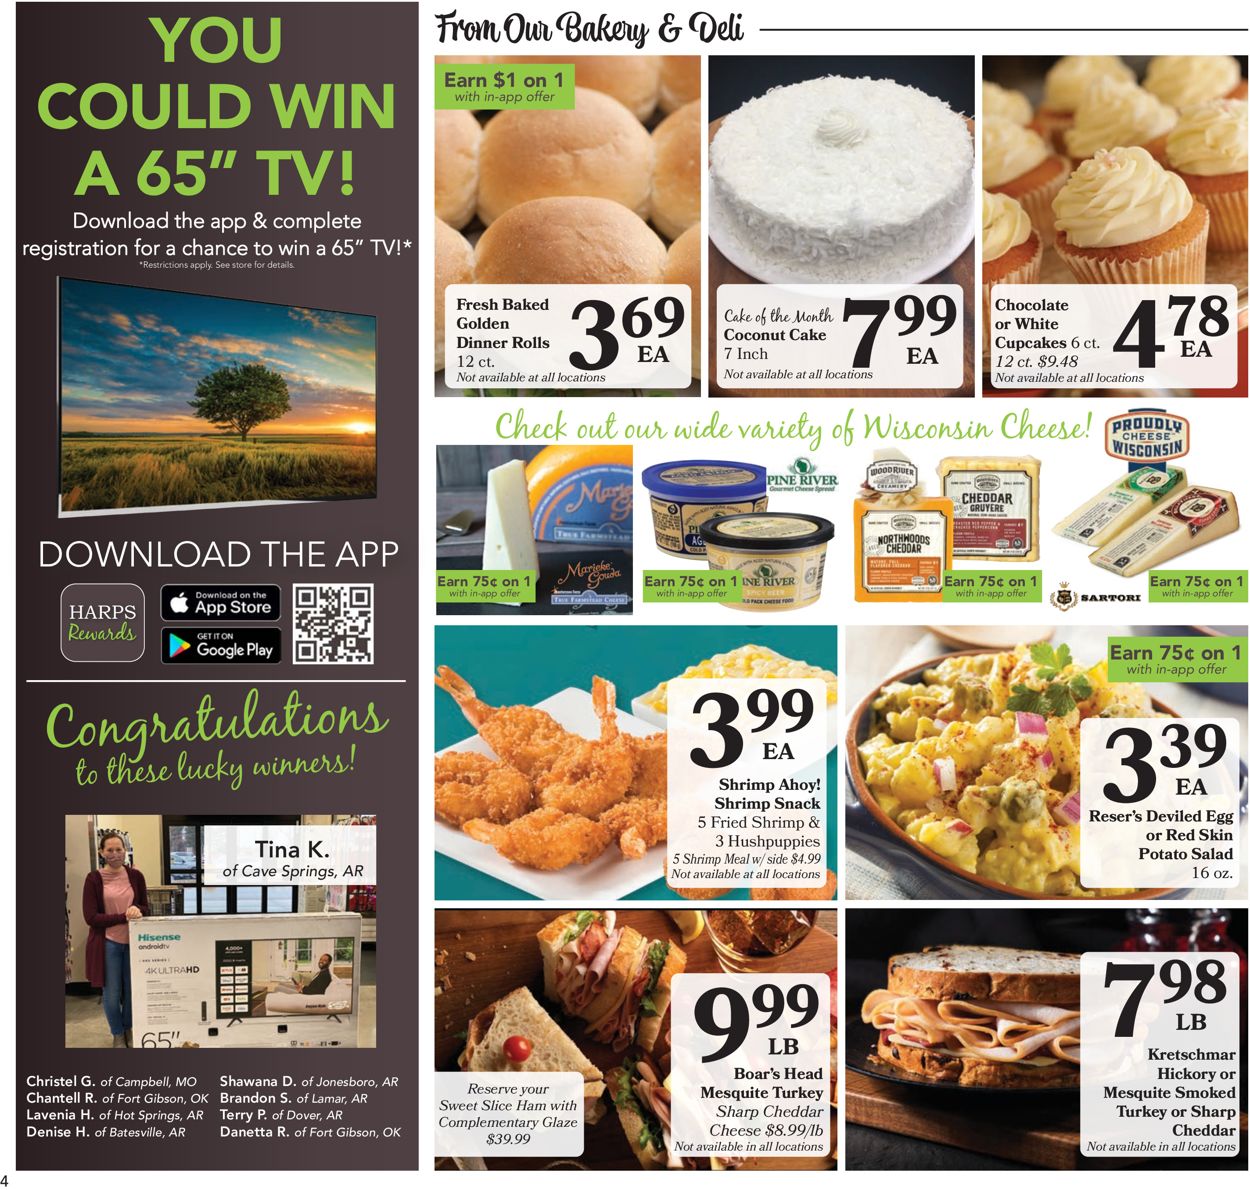 Harps Foods Ad from 03/17/2021